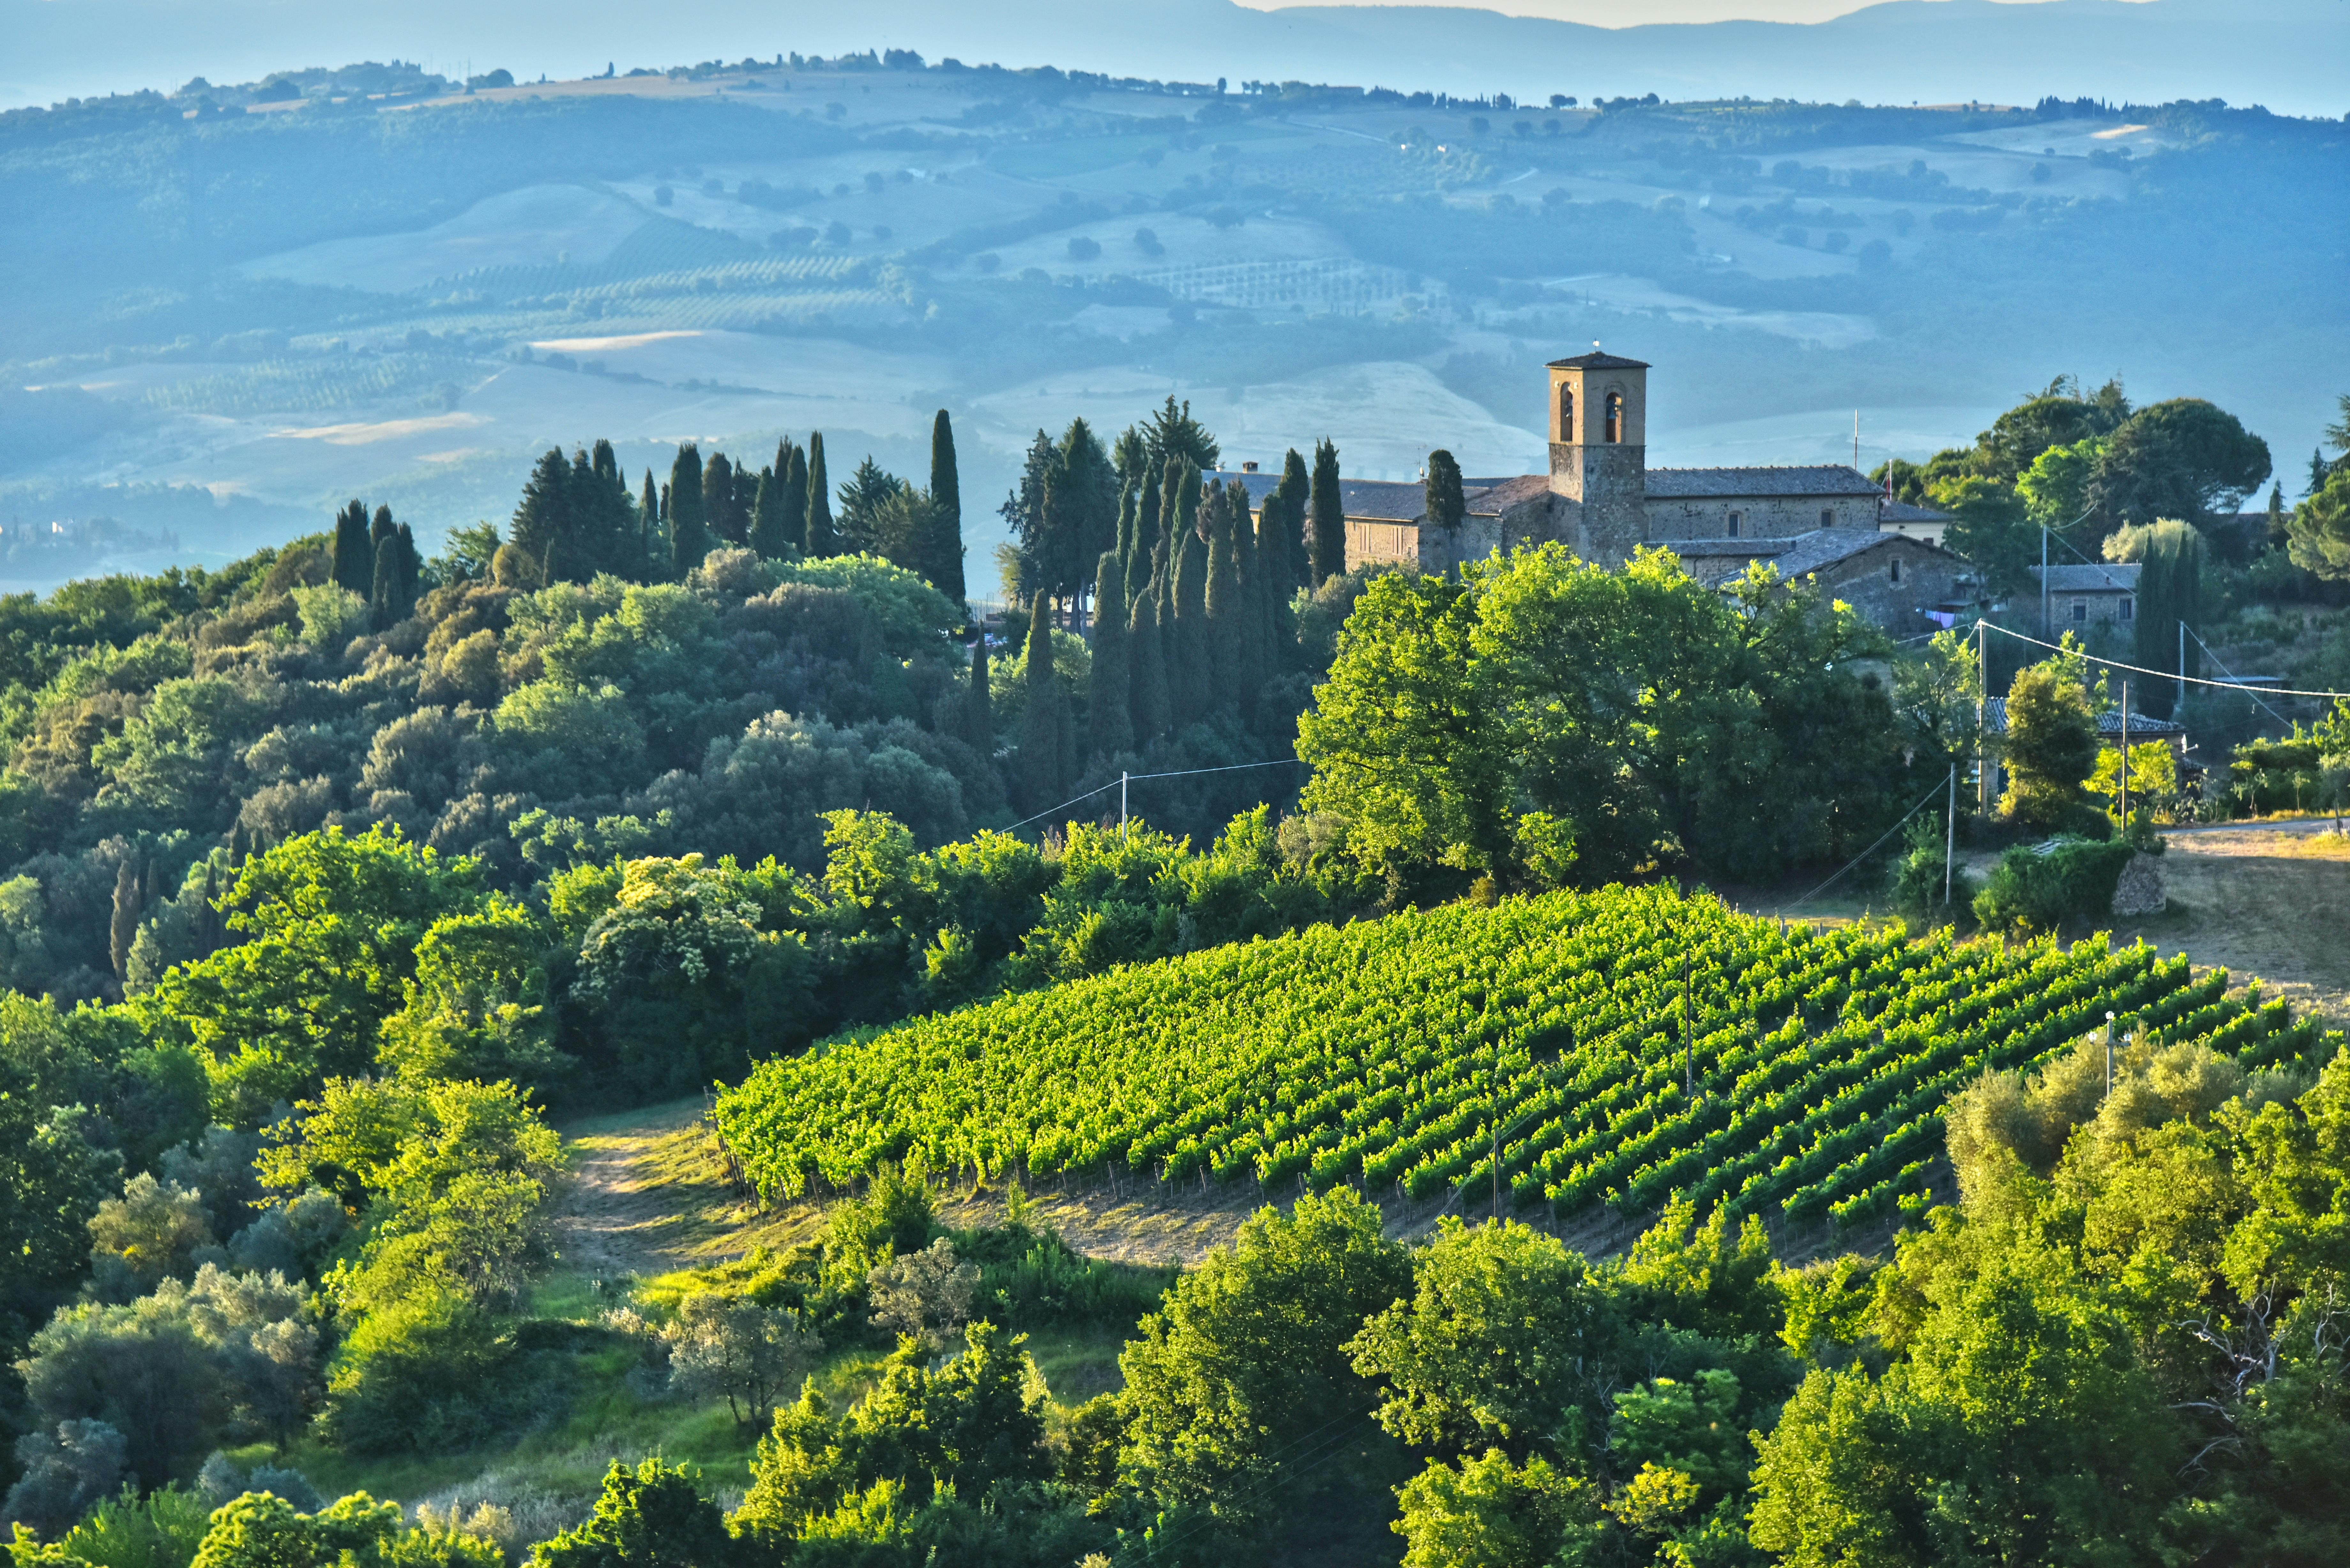 Brunello wine tasting and lunch in a Tuscan castle in Montalcino